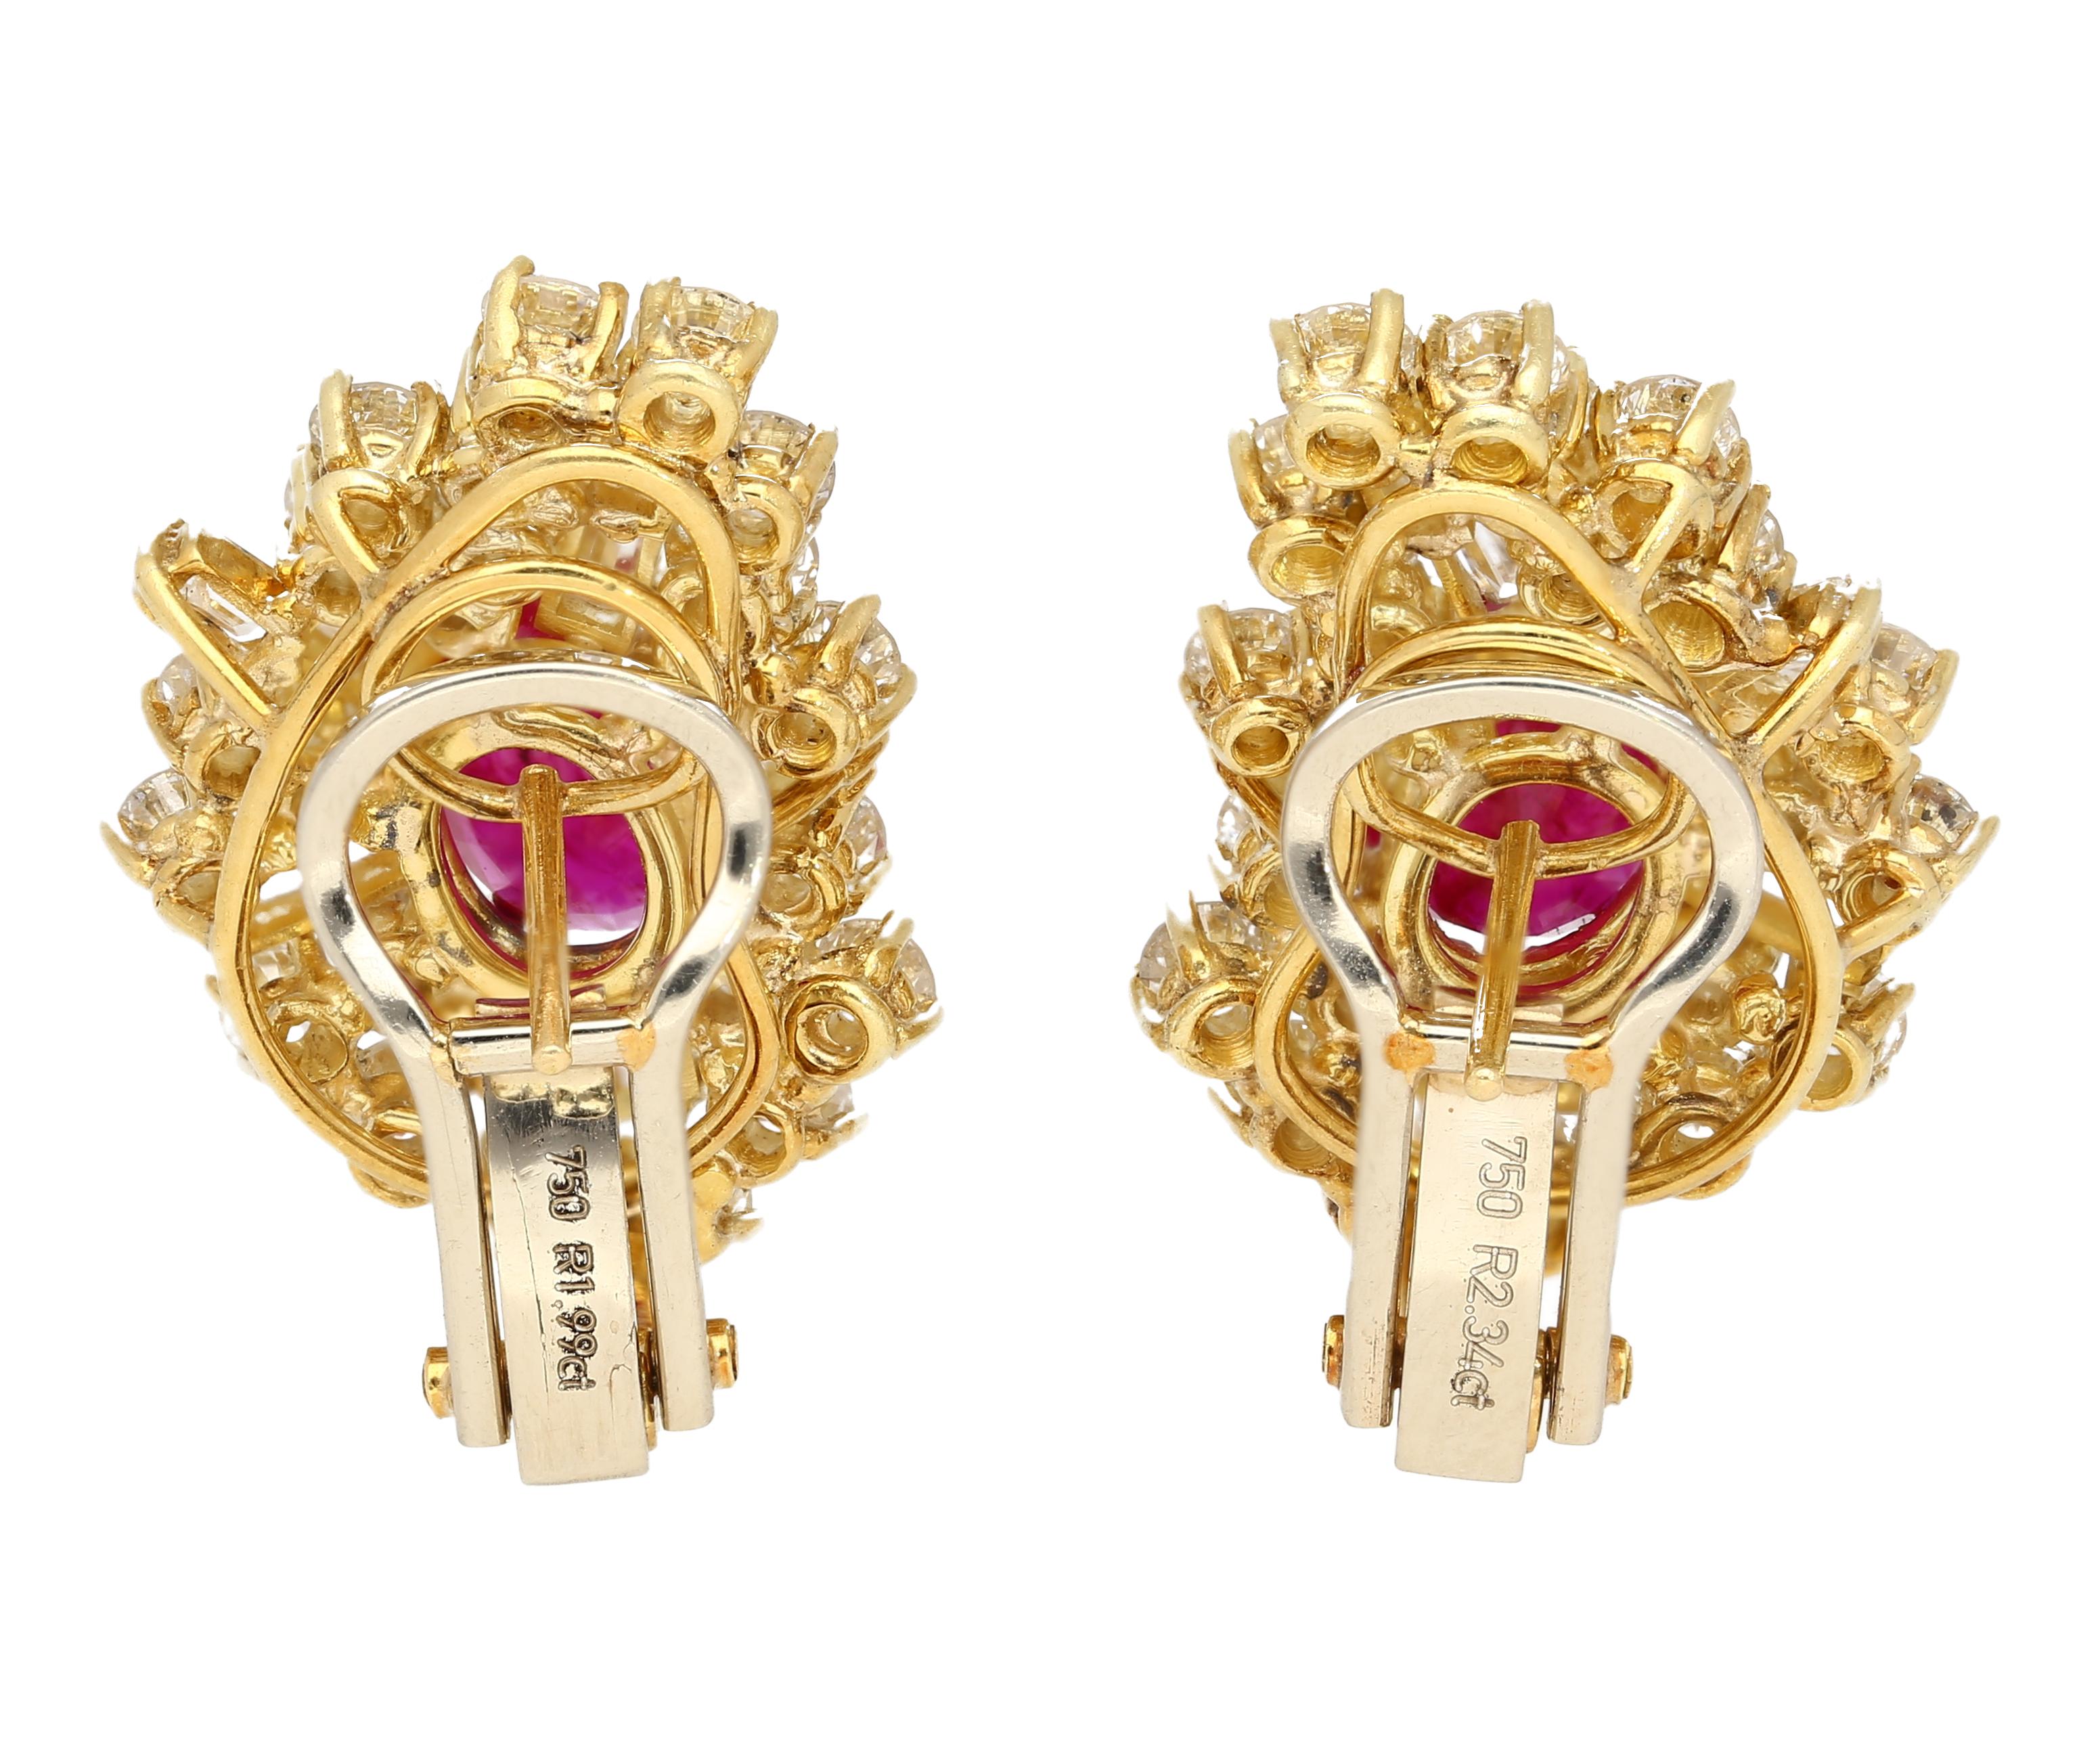 Vintage Ruby and Diamond Earrings in 18K Yellow Gold.

These earrings each feature an oval-cut red ruby center stone, totaling 4.50 carats in weight. The ruby is paired with a decorative array multi-cut diamonds, including baguette and round, for a